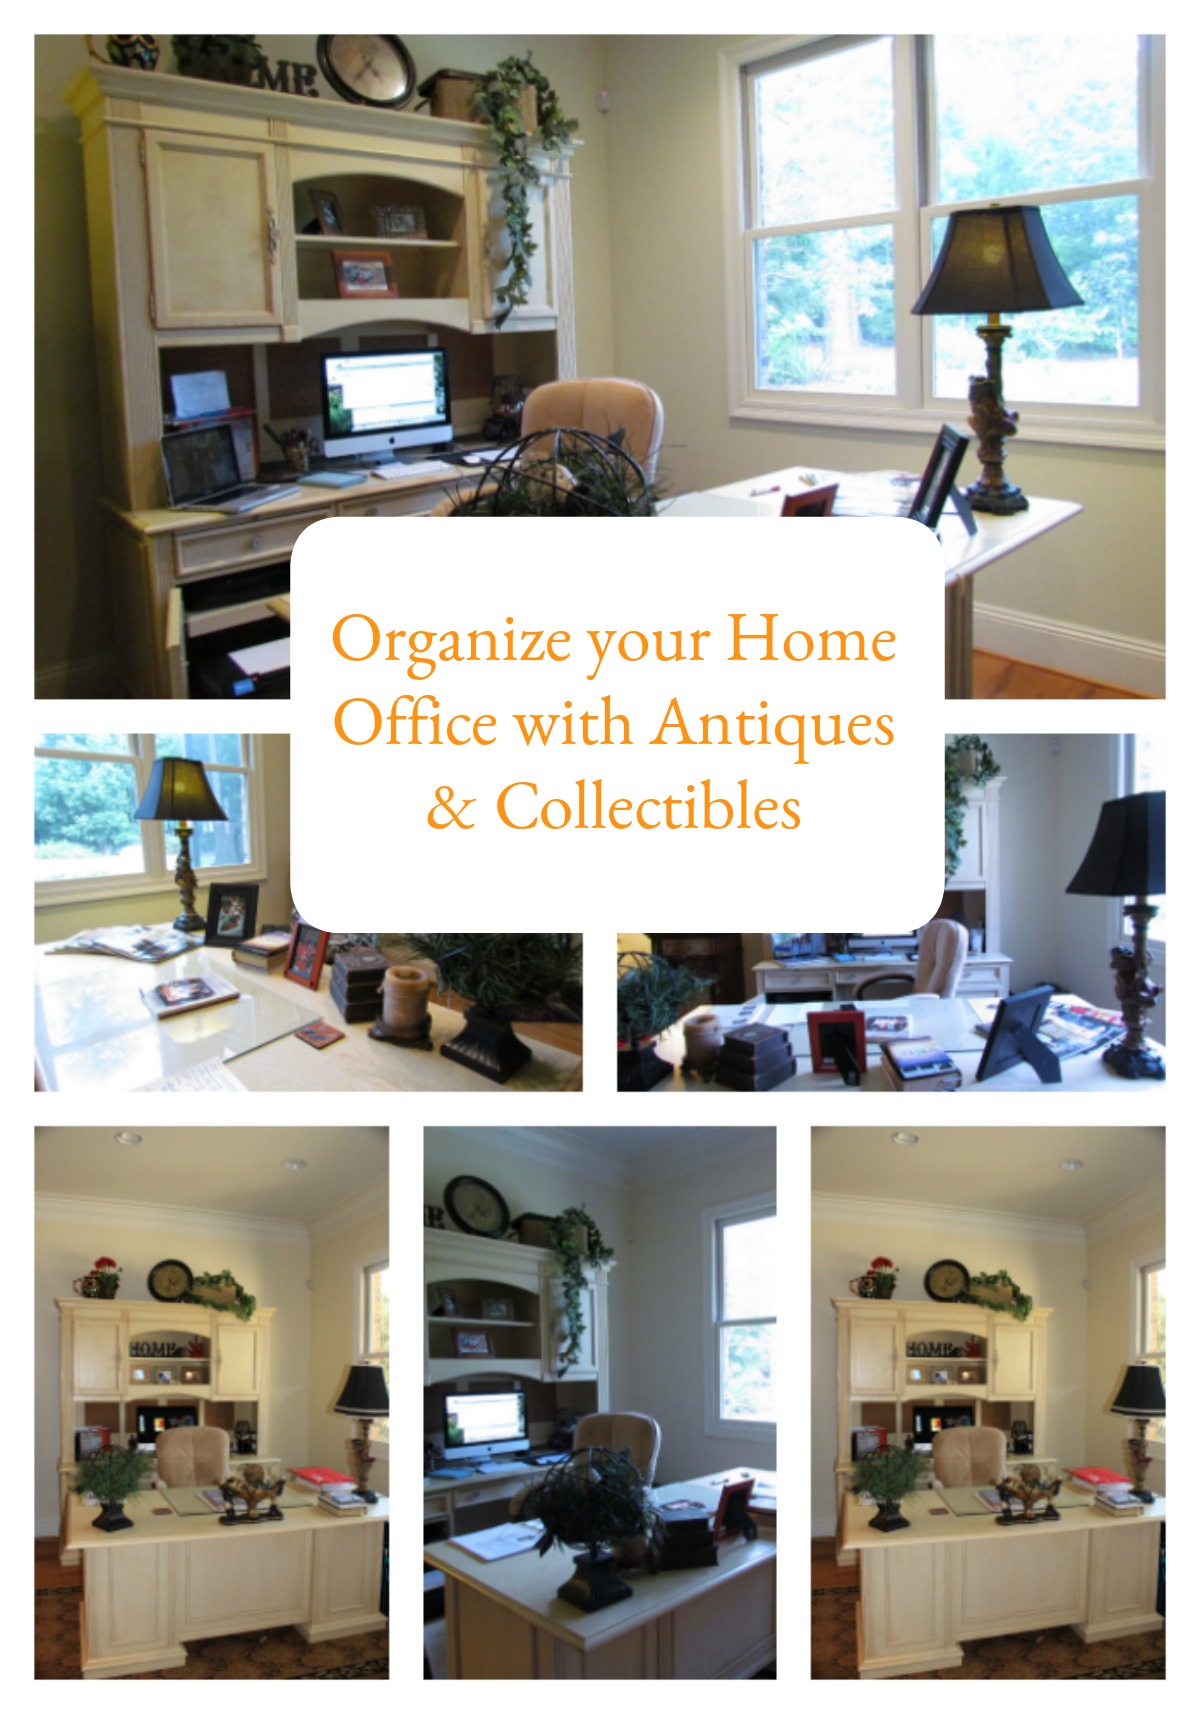 Organizing a Home Office Using Antiques & Collectibles